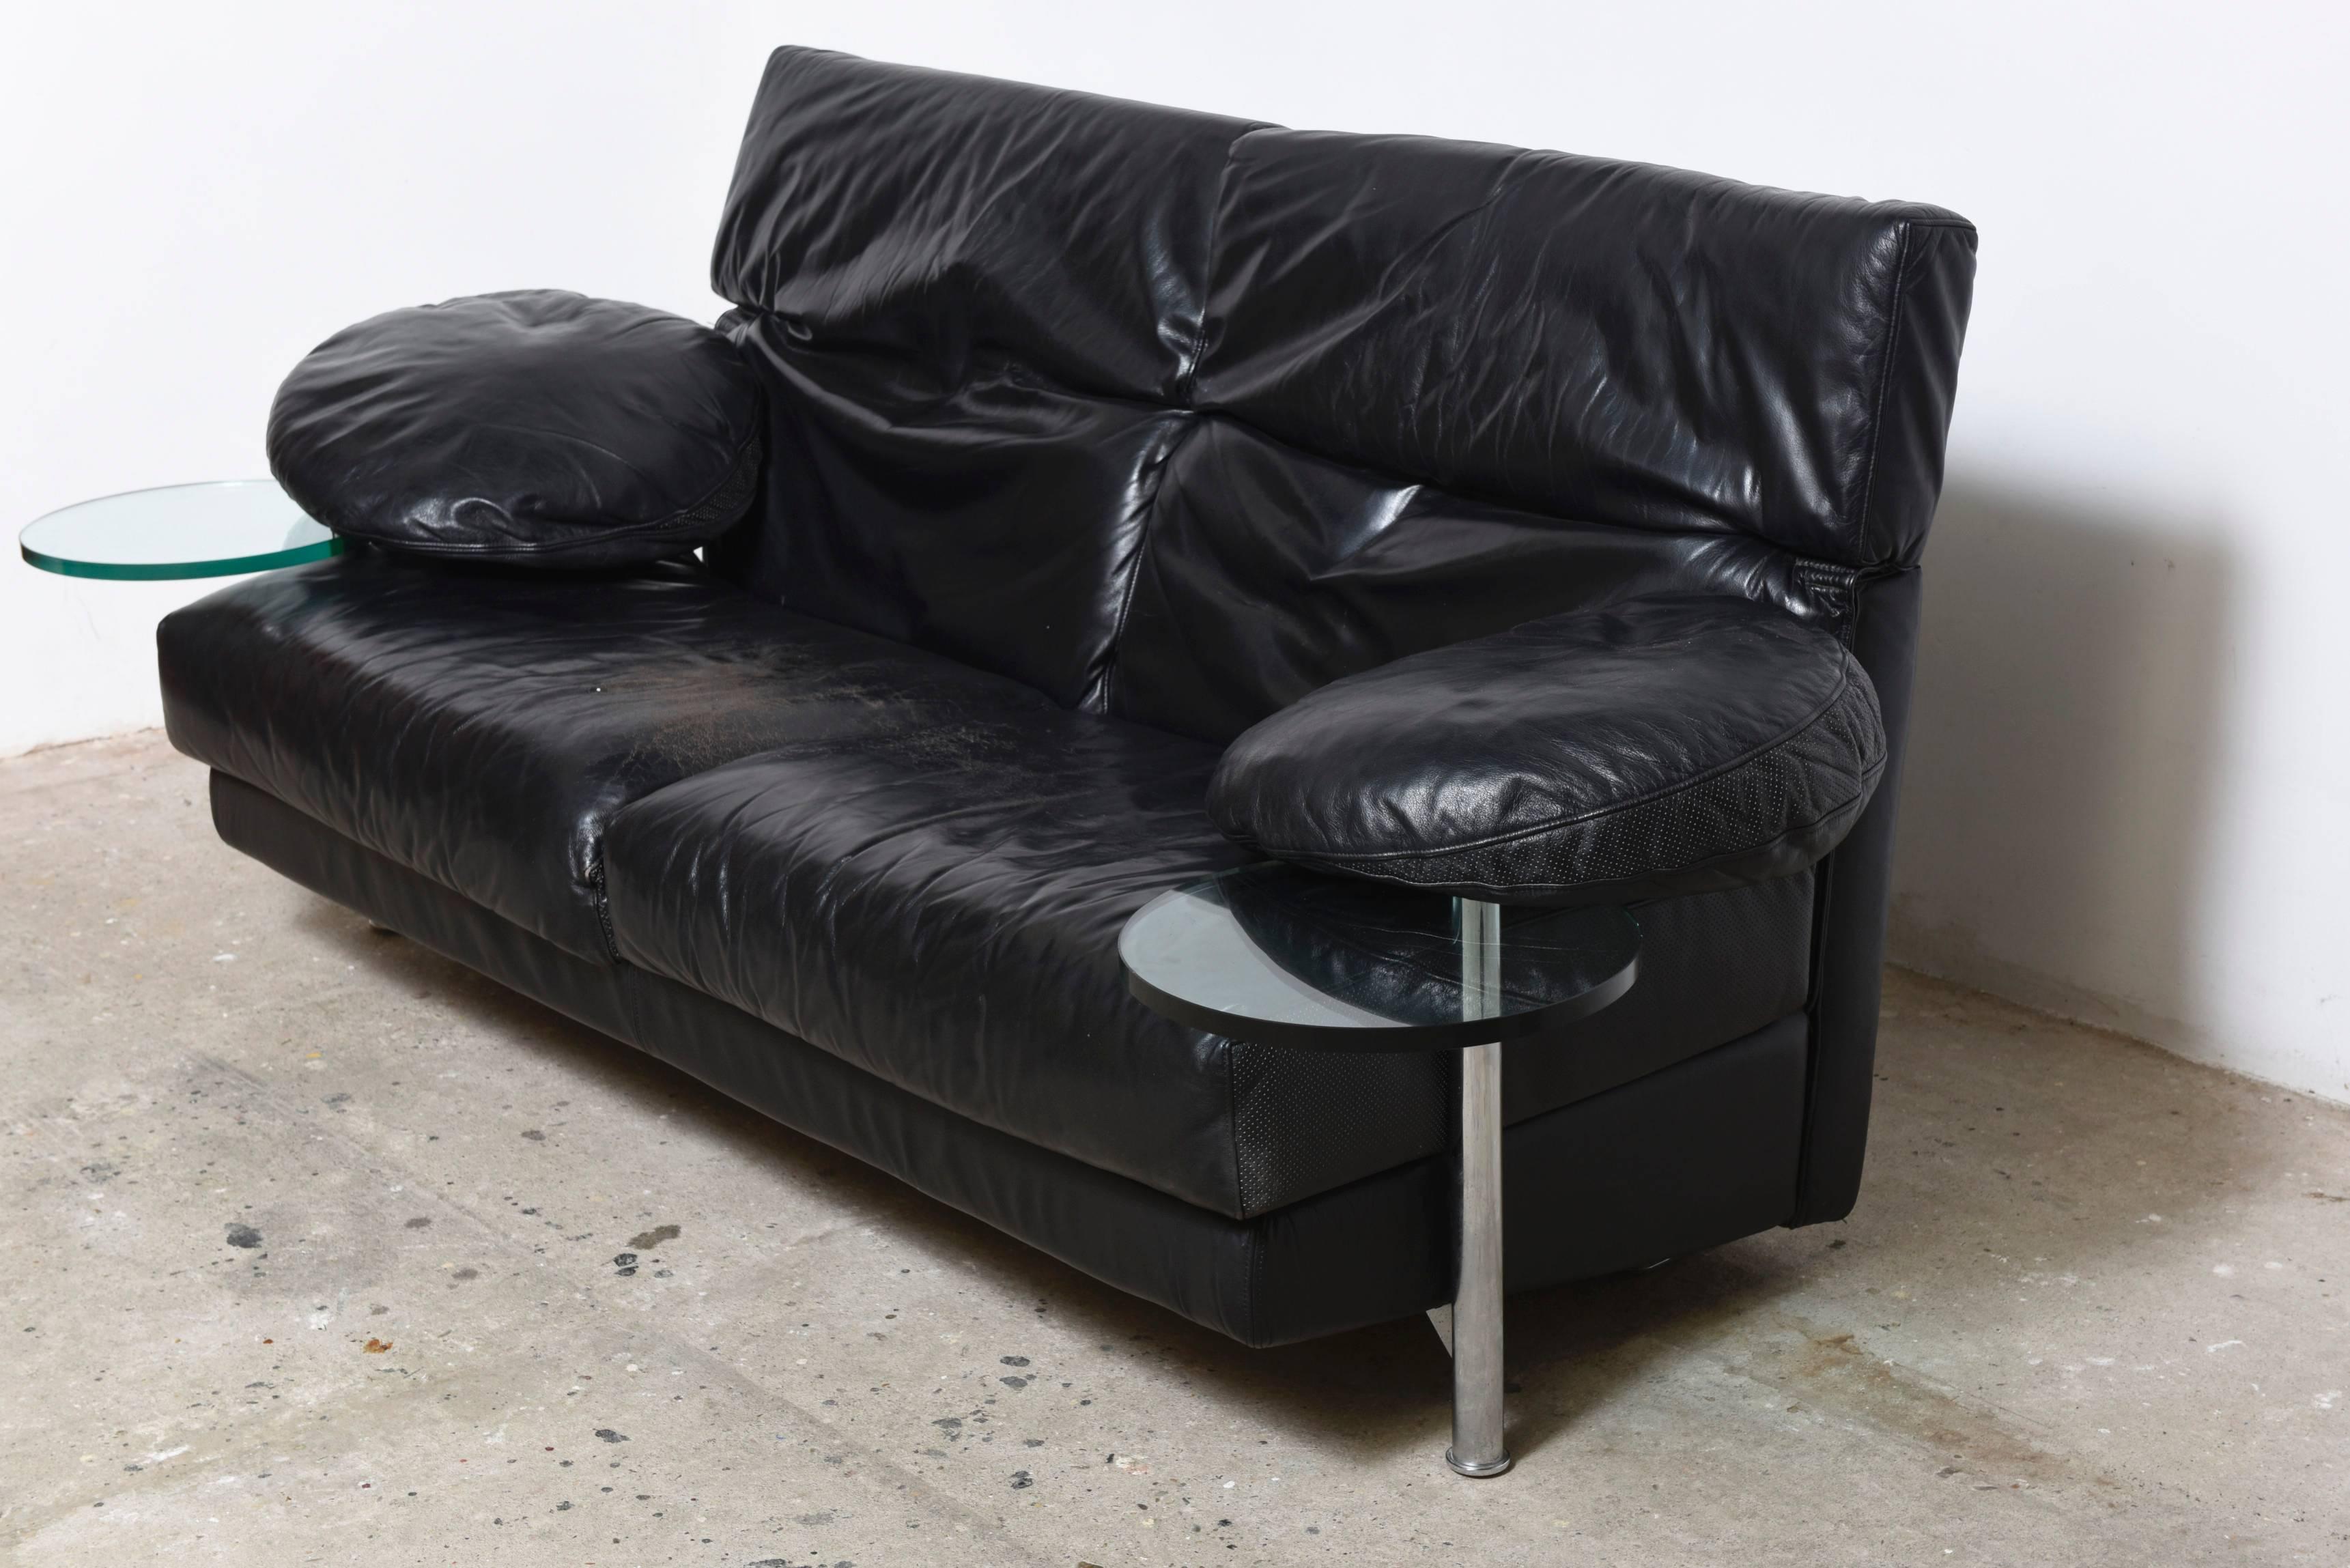 Arca two-seat, couch with right and left armrest provided with transparent glass serving tables which swing out from under the leather armrest.

Framework made of structural steel and black leather.

The backrests, which are easily adjustable,